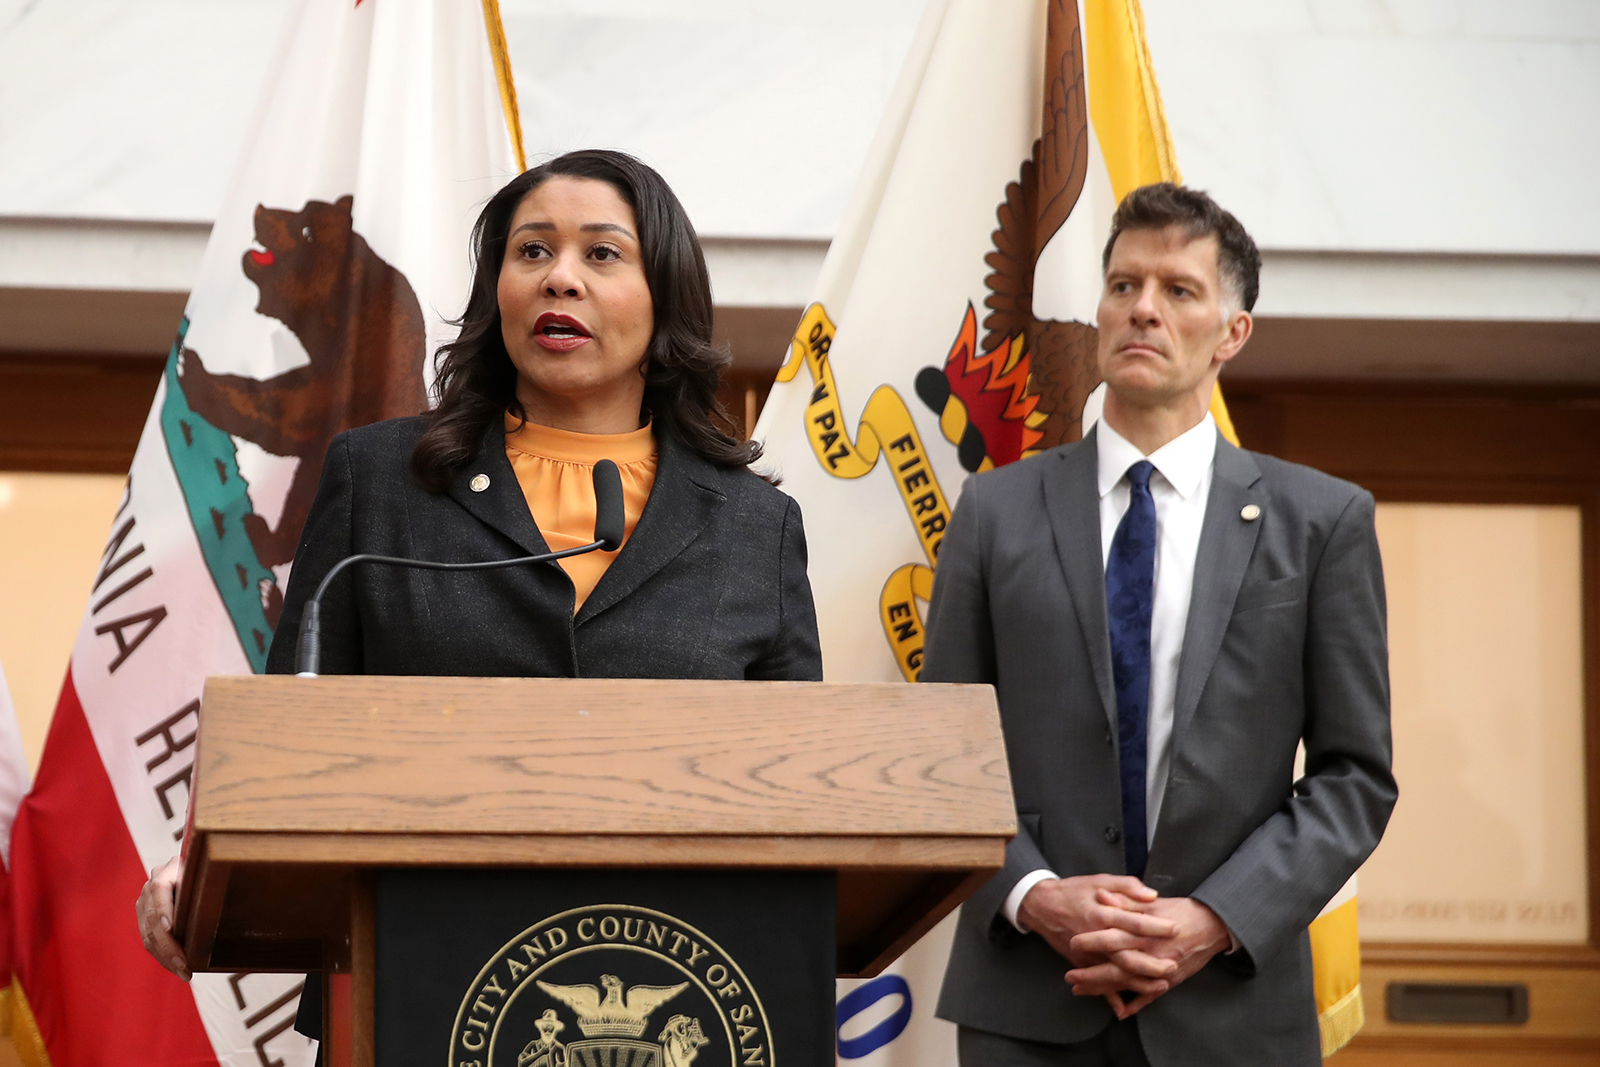 San Francisco Mayor London Breed speaks during a press conference at San Francisco City Hall on March 16.